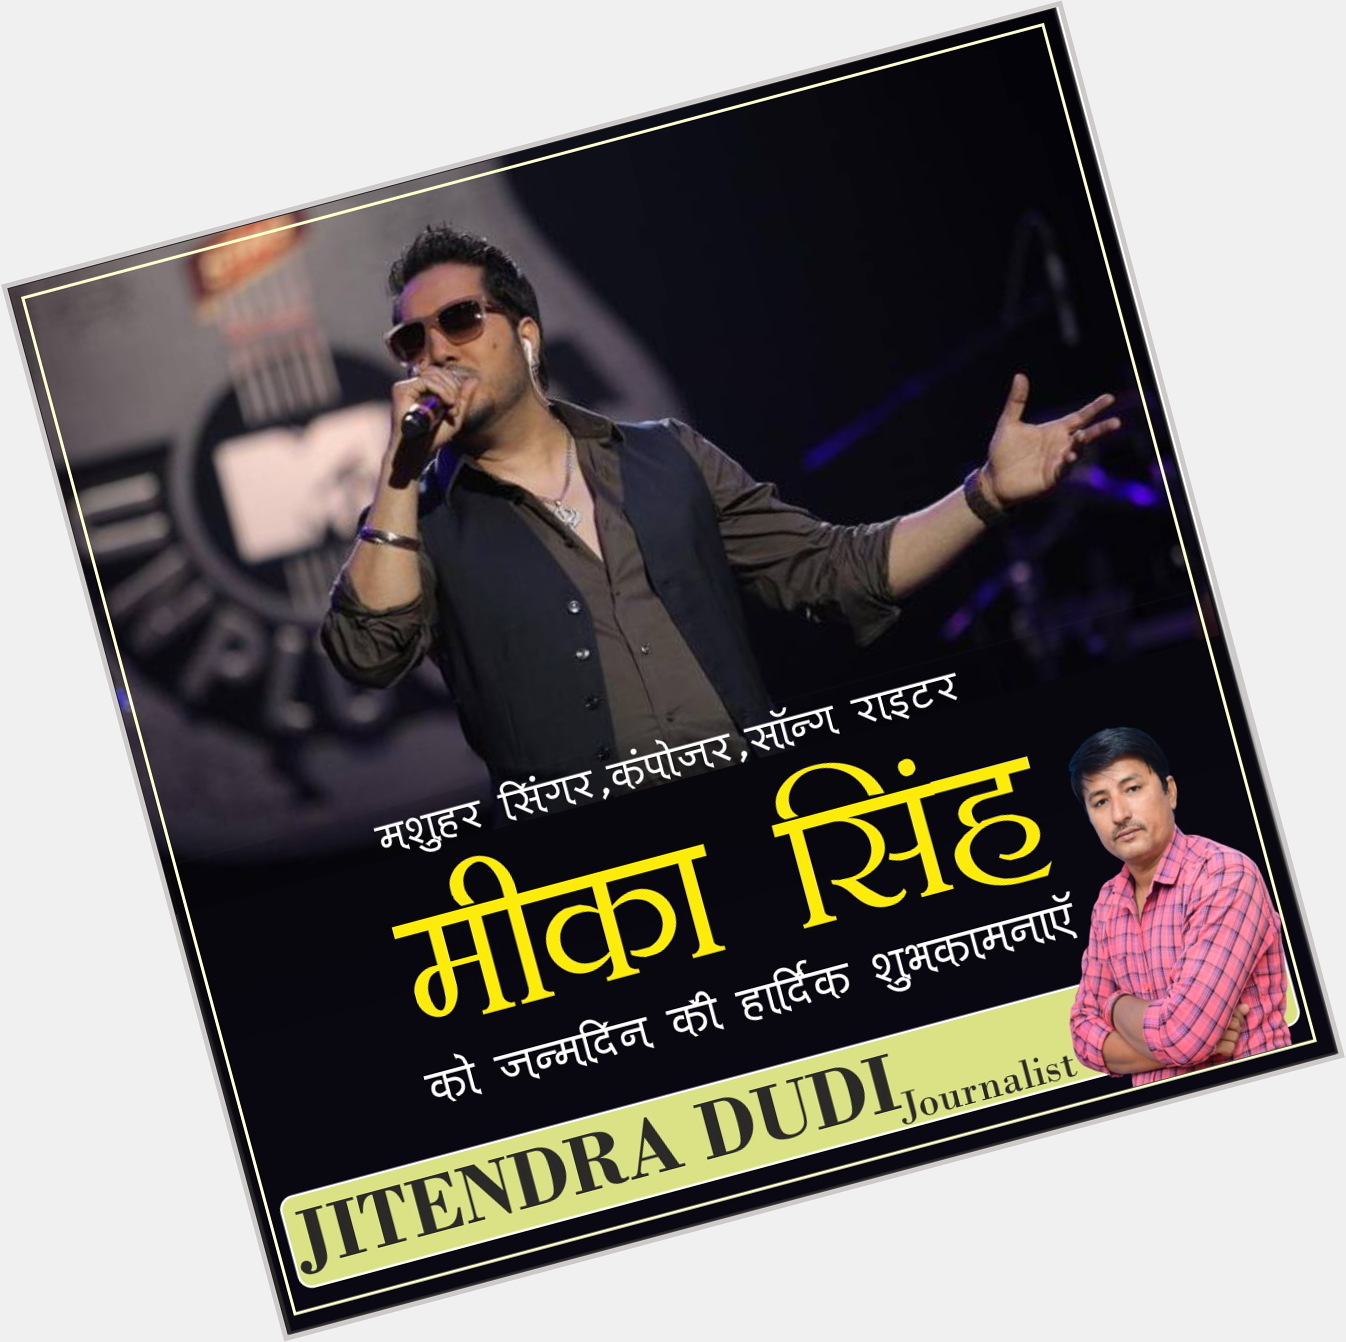 Happy birthday to famous singer composer songwriter Mika Singh ji 